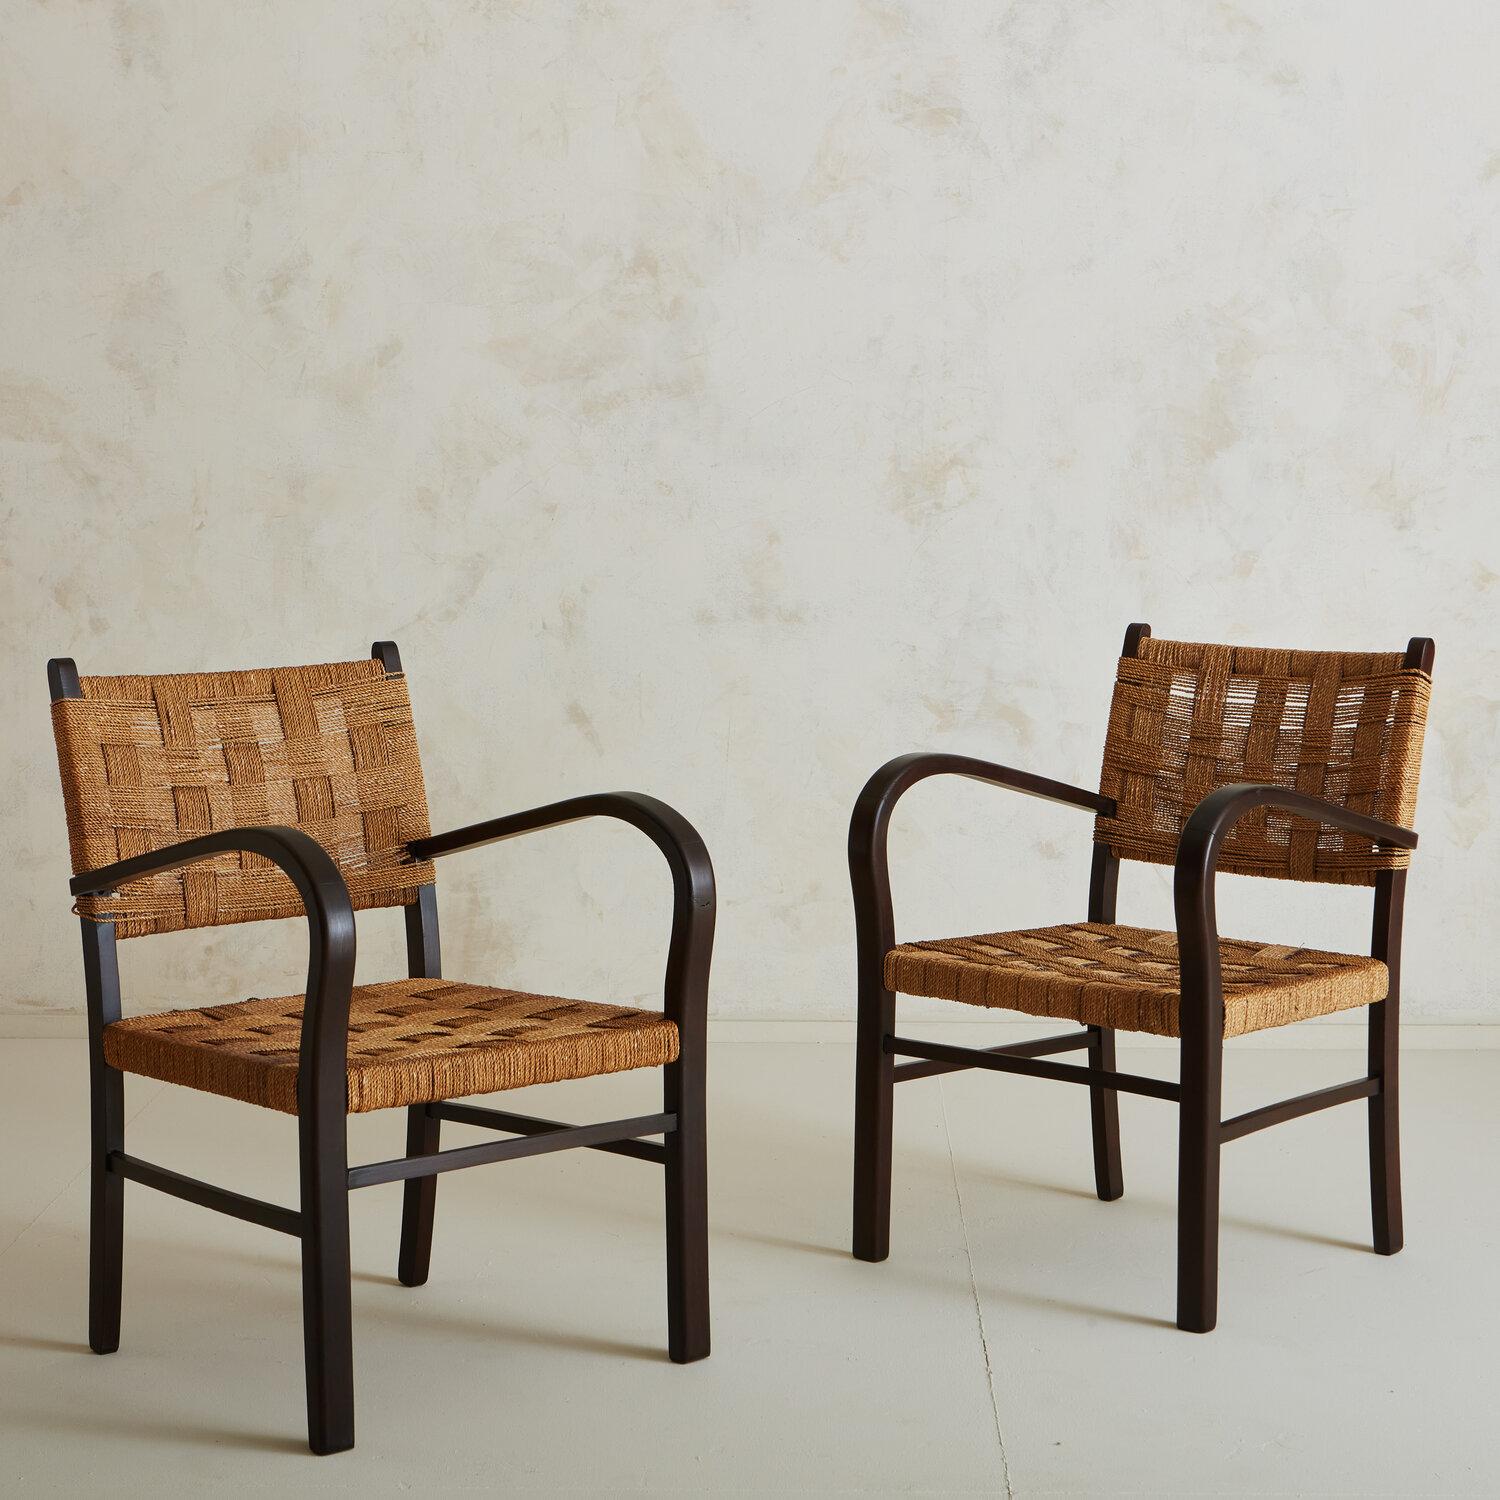 A pair of lounge chairs sourced in the South of France featuring wooded frames and a woven rope seat and back. These chairs blend well with many other design genres and can also float between living spaces.